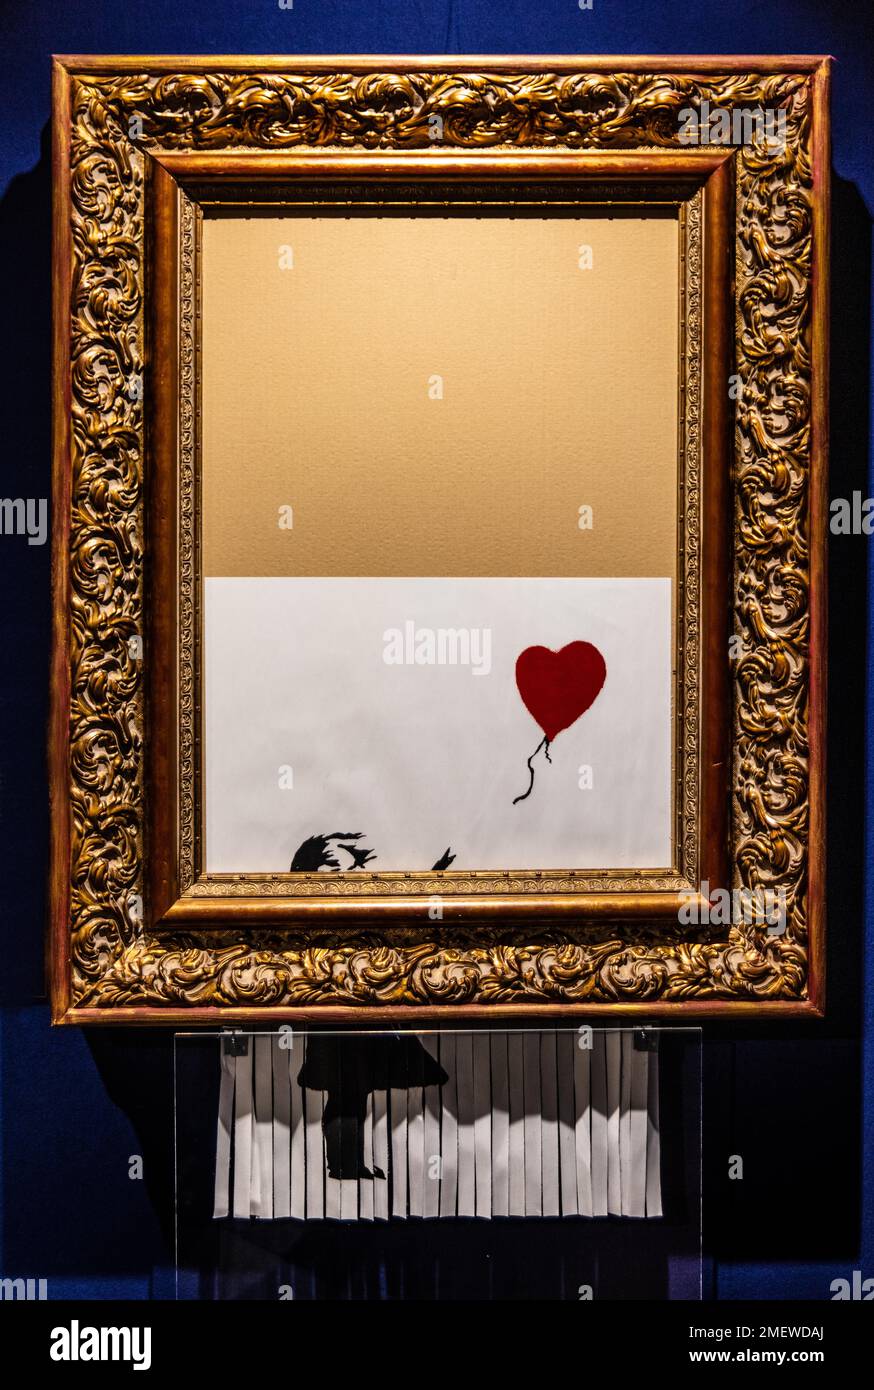 Girl with Balloon, was partially destroyed at an auction by a shredder built into the frame, 2002, Banksy, exhibition about the street artist Stock Photo